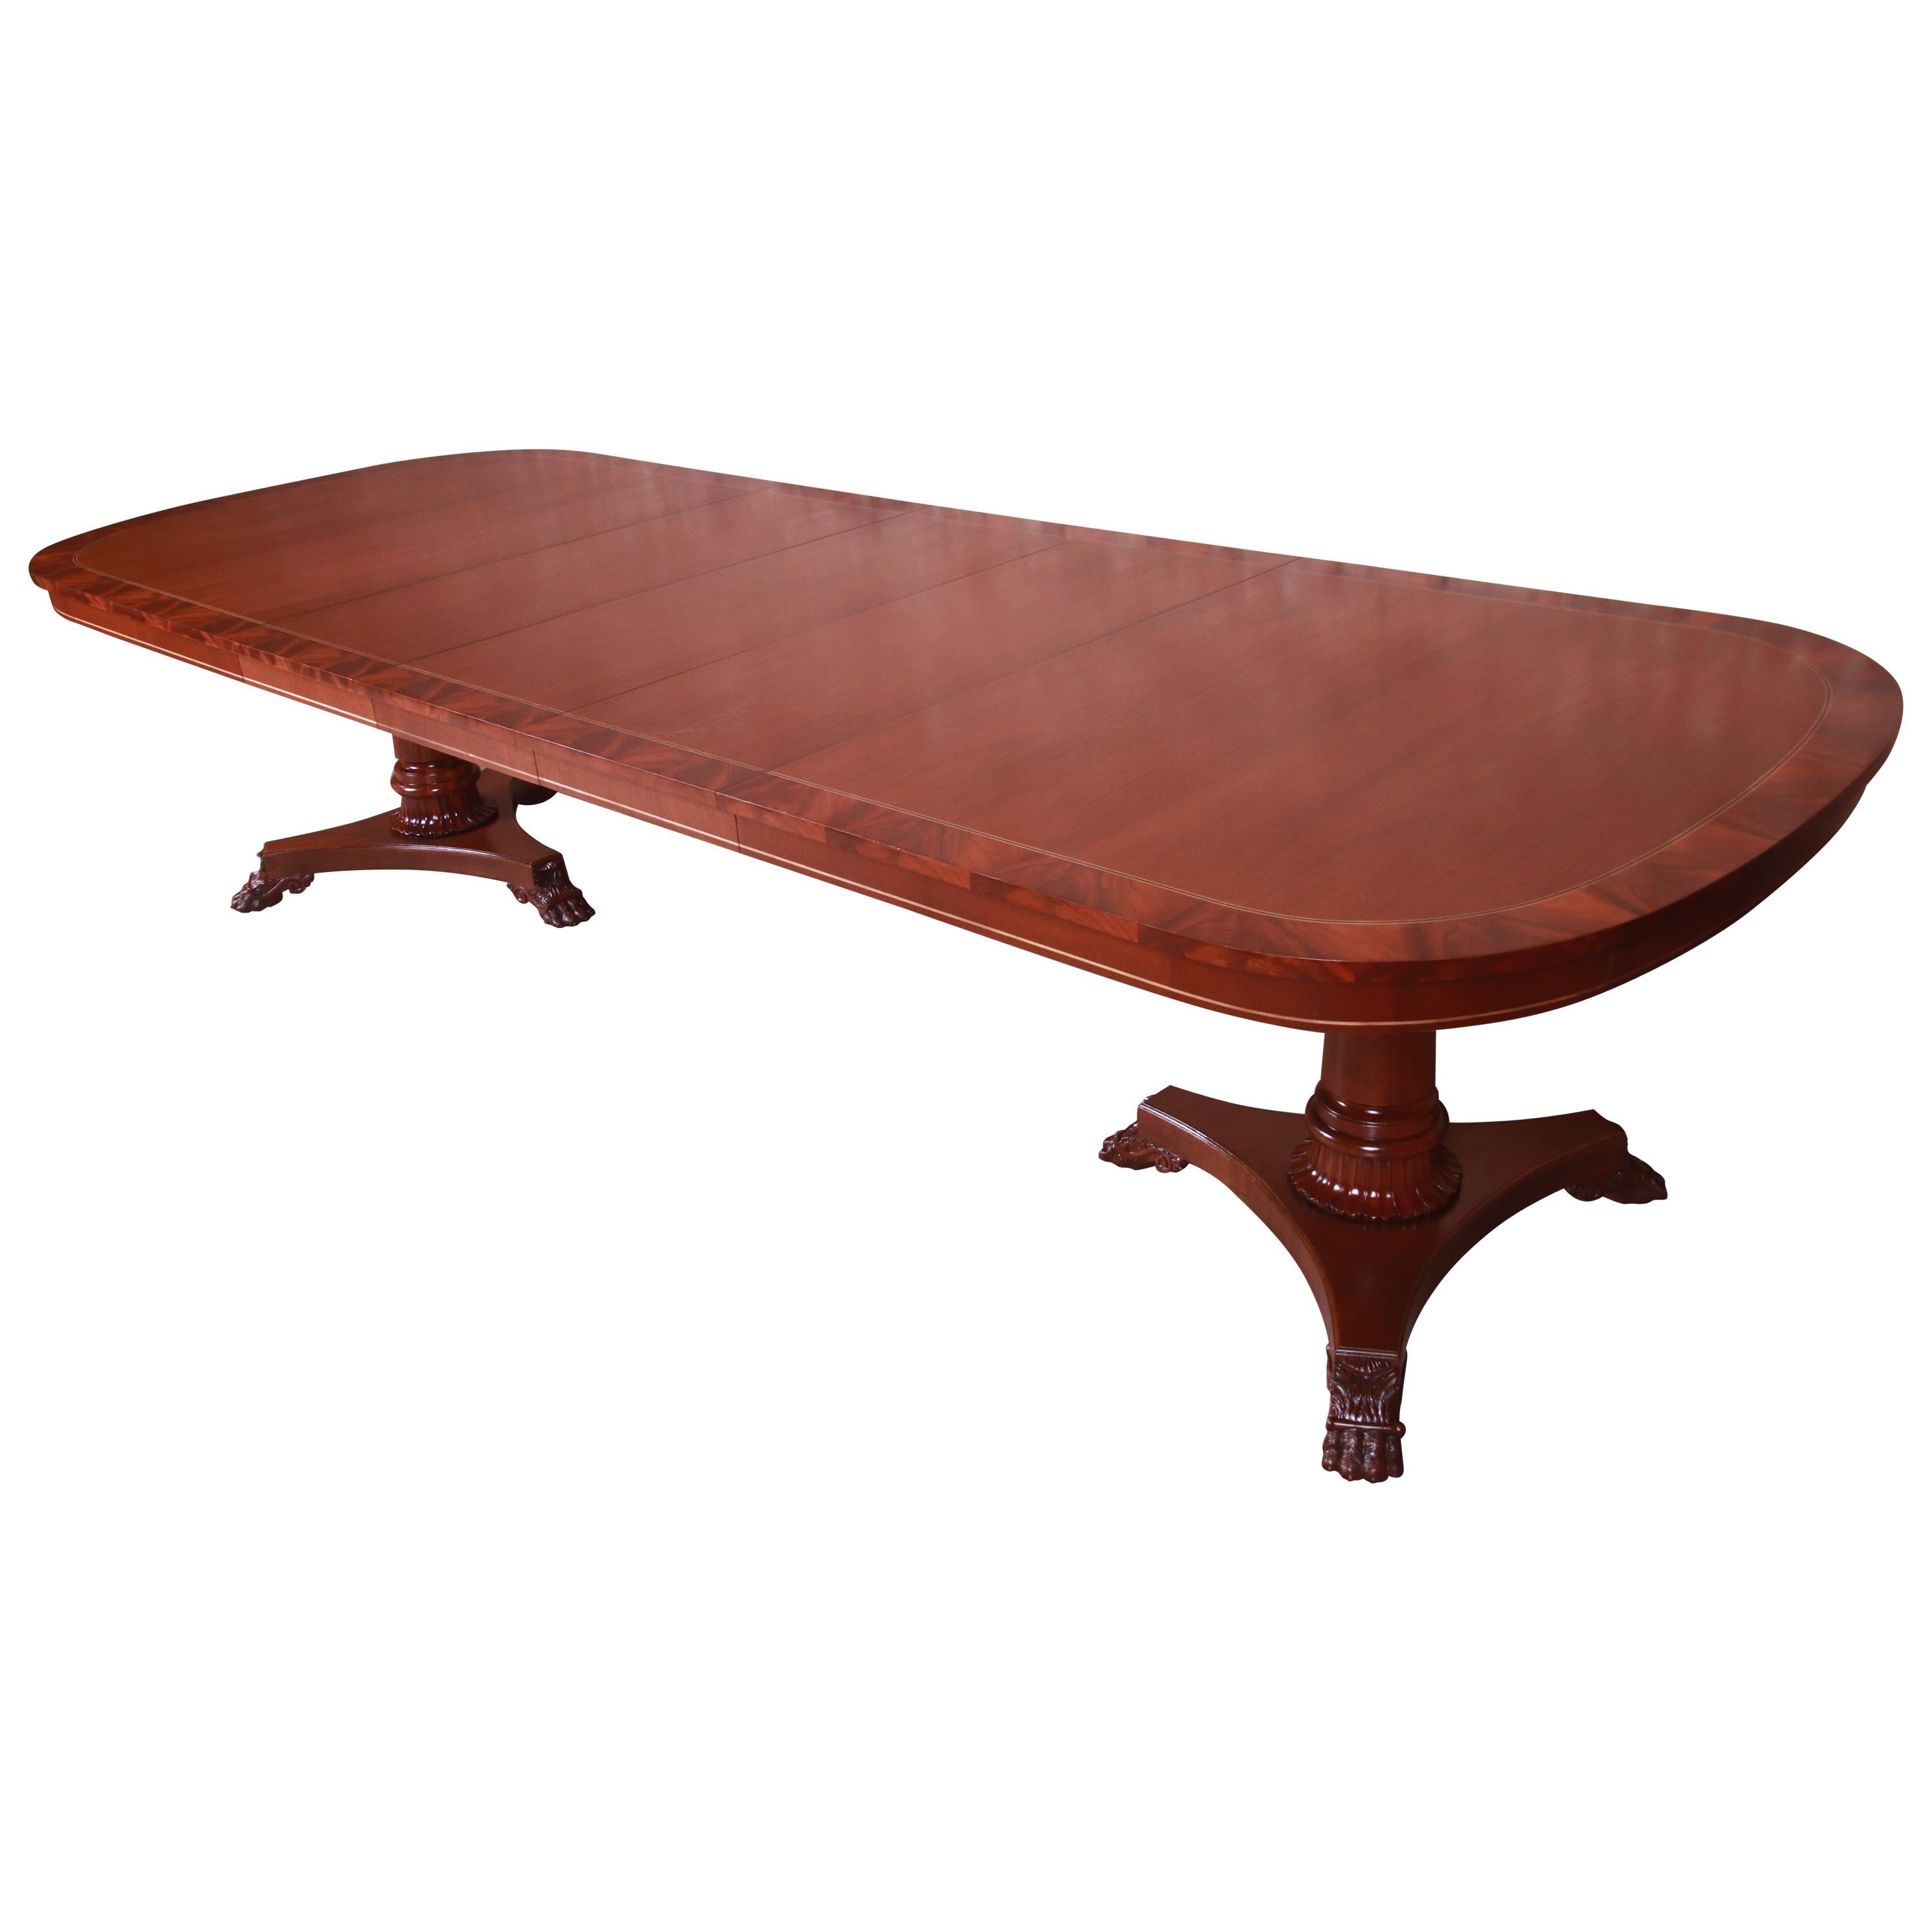 Kindel Furniture Neoclassical Banded Mahogany Extension Dining Table, Restored